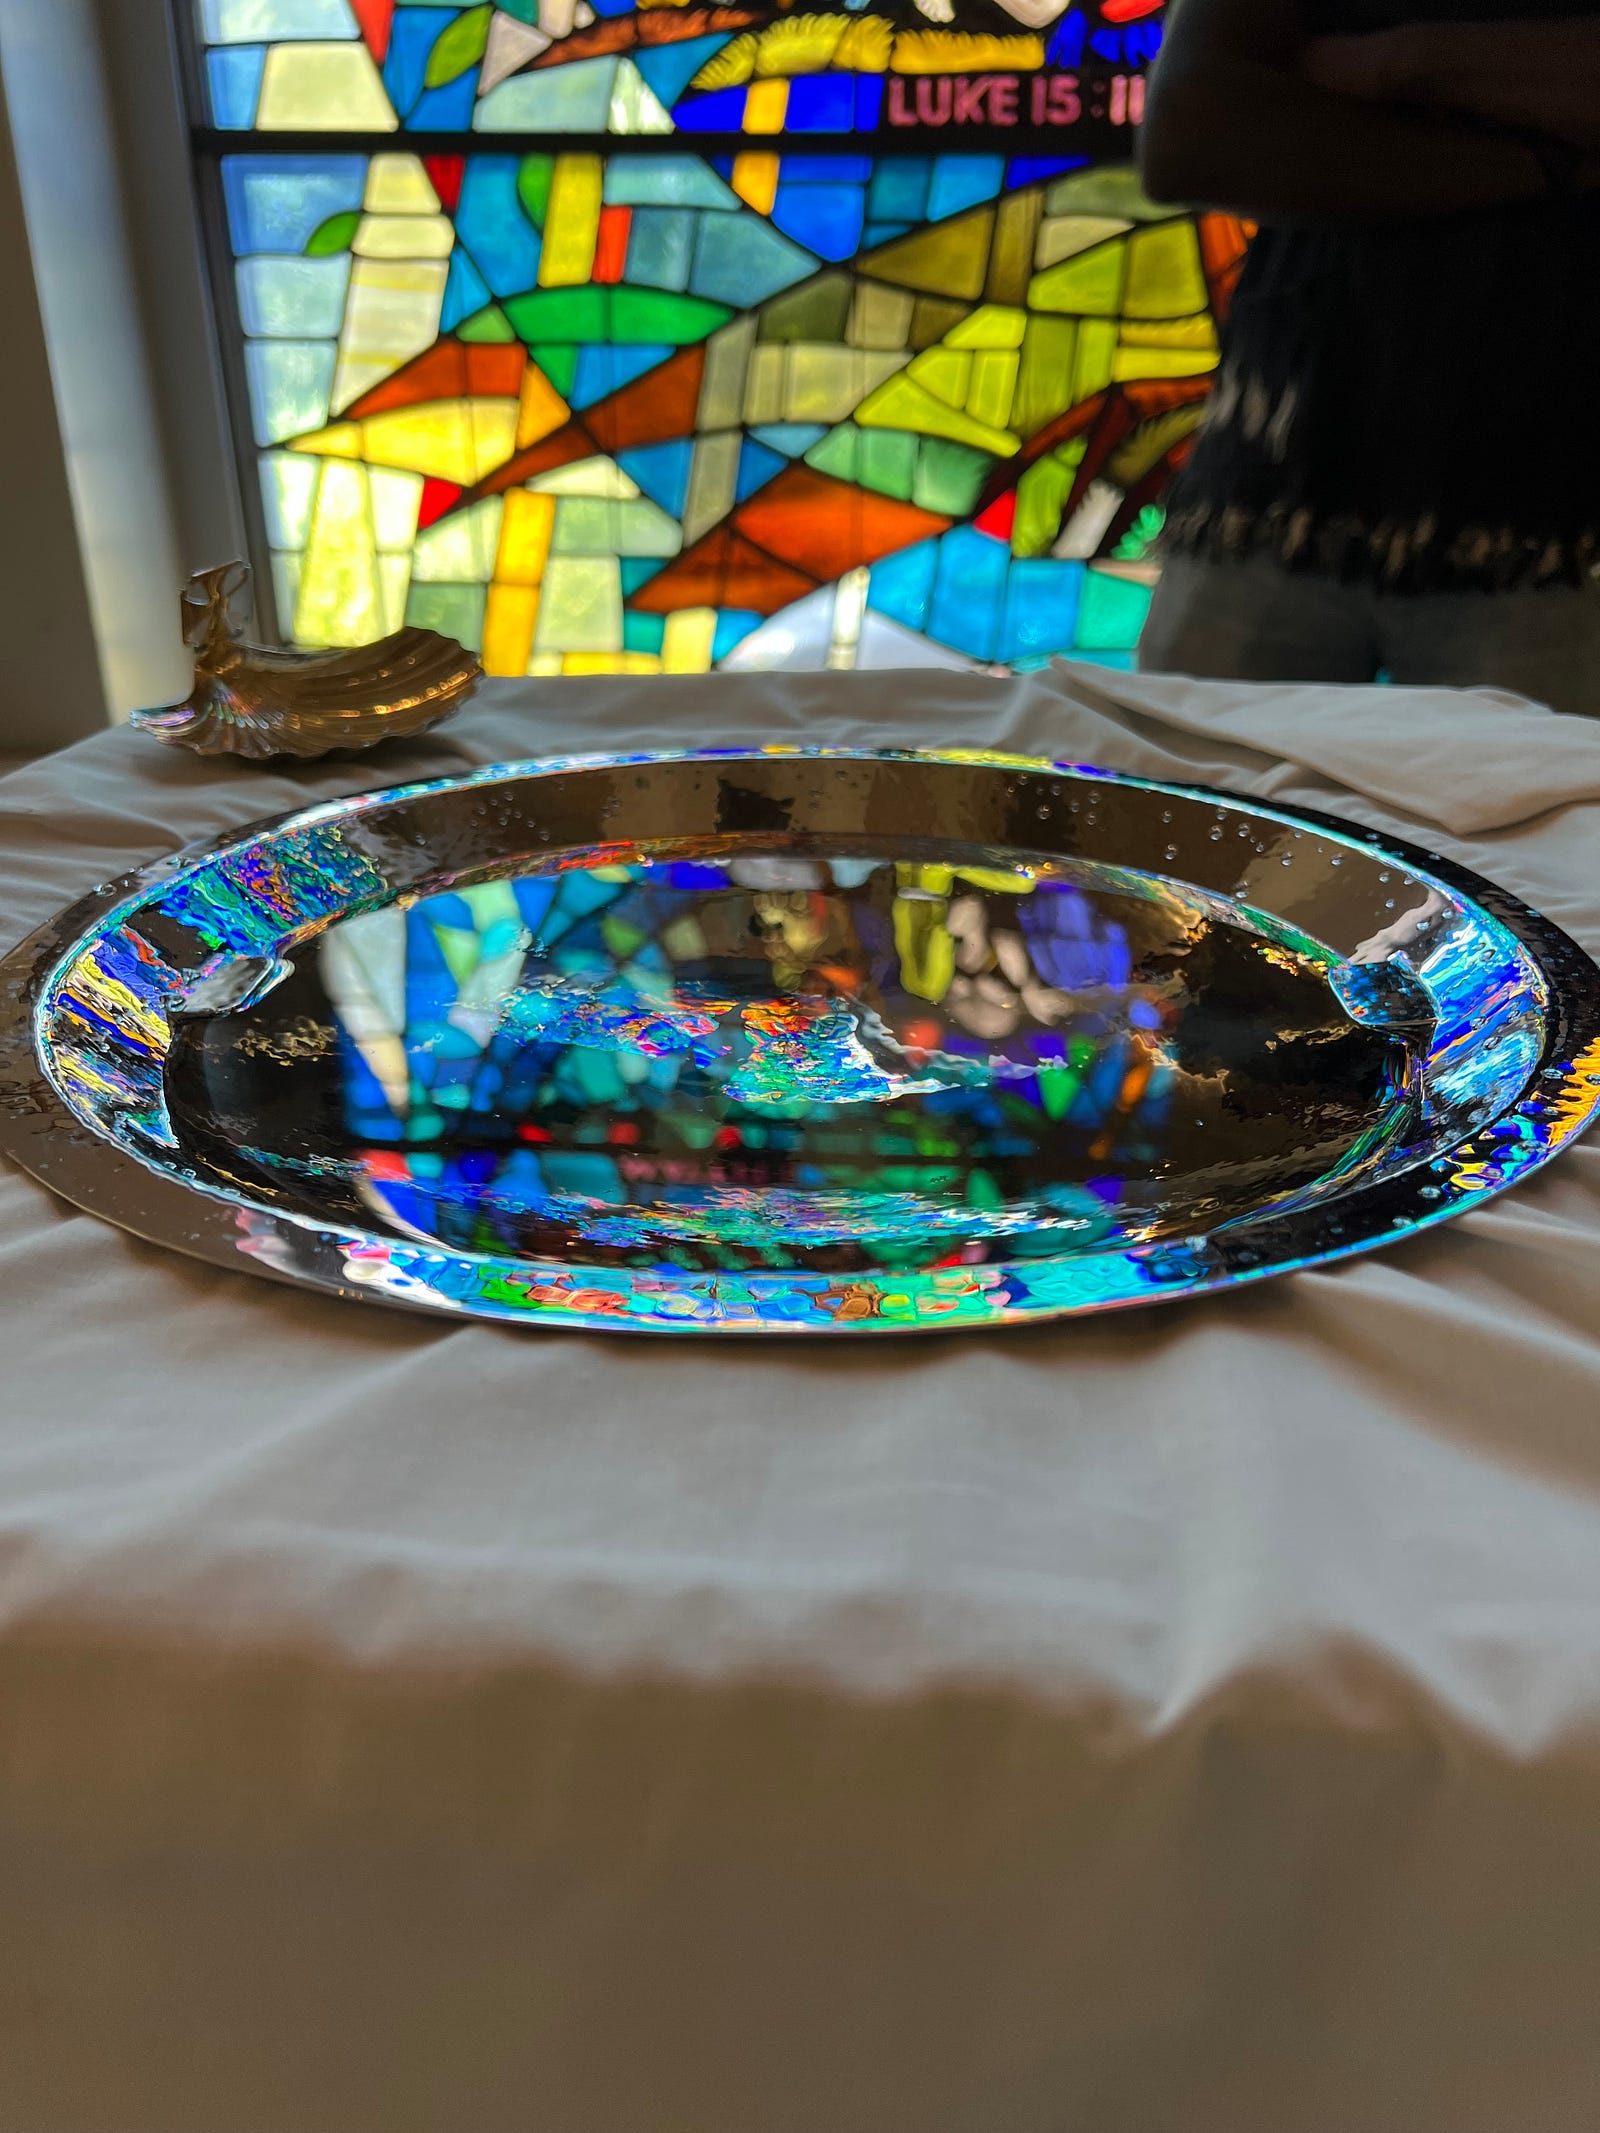 Photo of the baptismal font at St Andrews, awash in a riot of color from the stained glass behind.